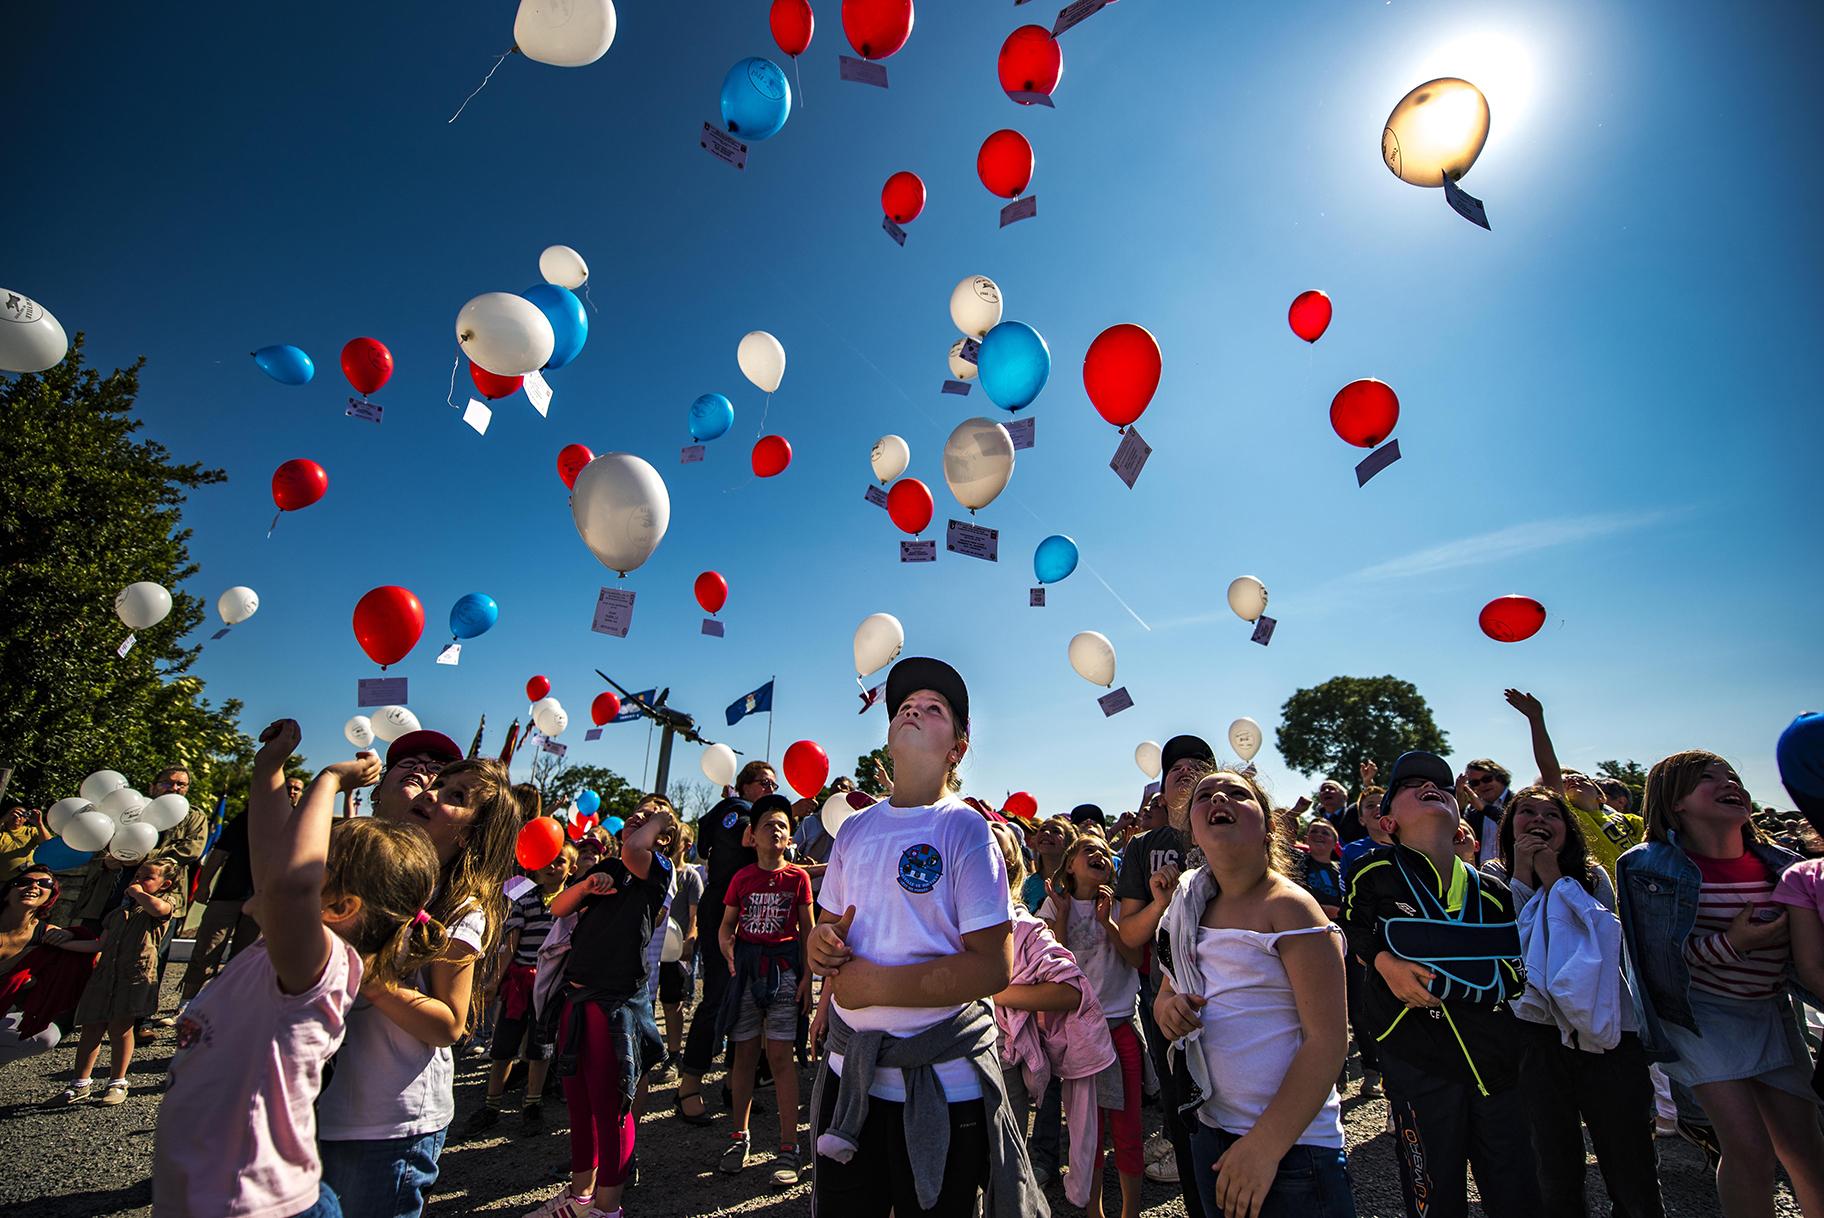 French children release balloons into the air during a D-Day remembrance ceremony at the United States Army Air Forces Transport Memorial in Picauville, France, June 1, 2017. (U.S. Air Force photo / Senior Airman Devin Boyer)